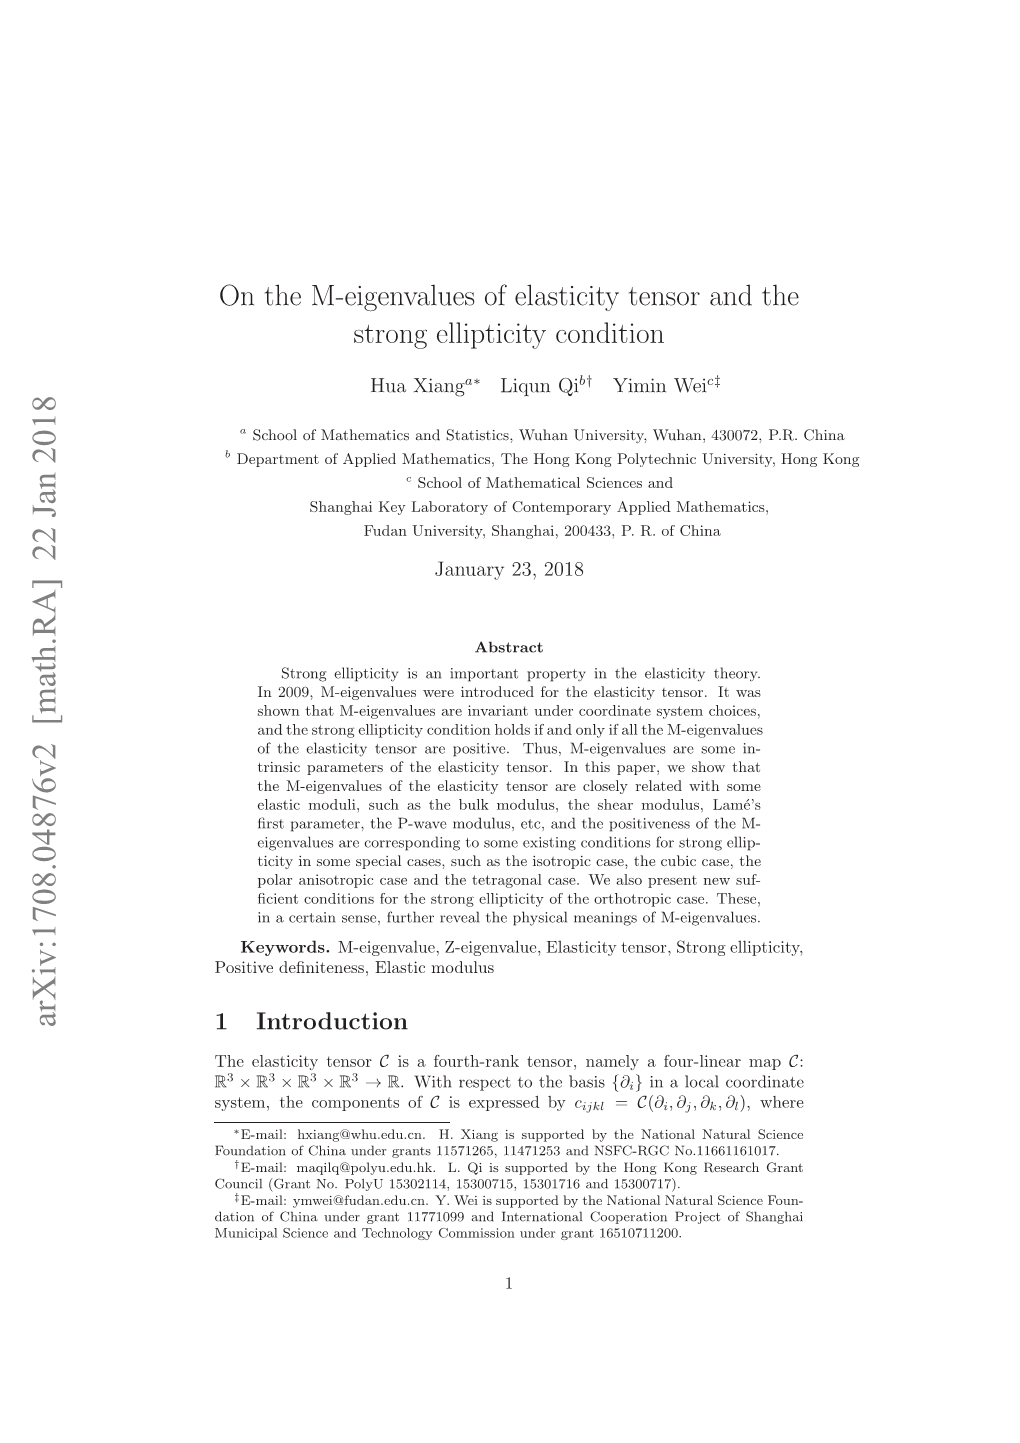 On the M-Eigenvalues of Elasticity Tensor and the Strong Ellipticity